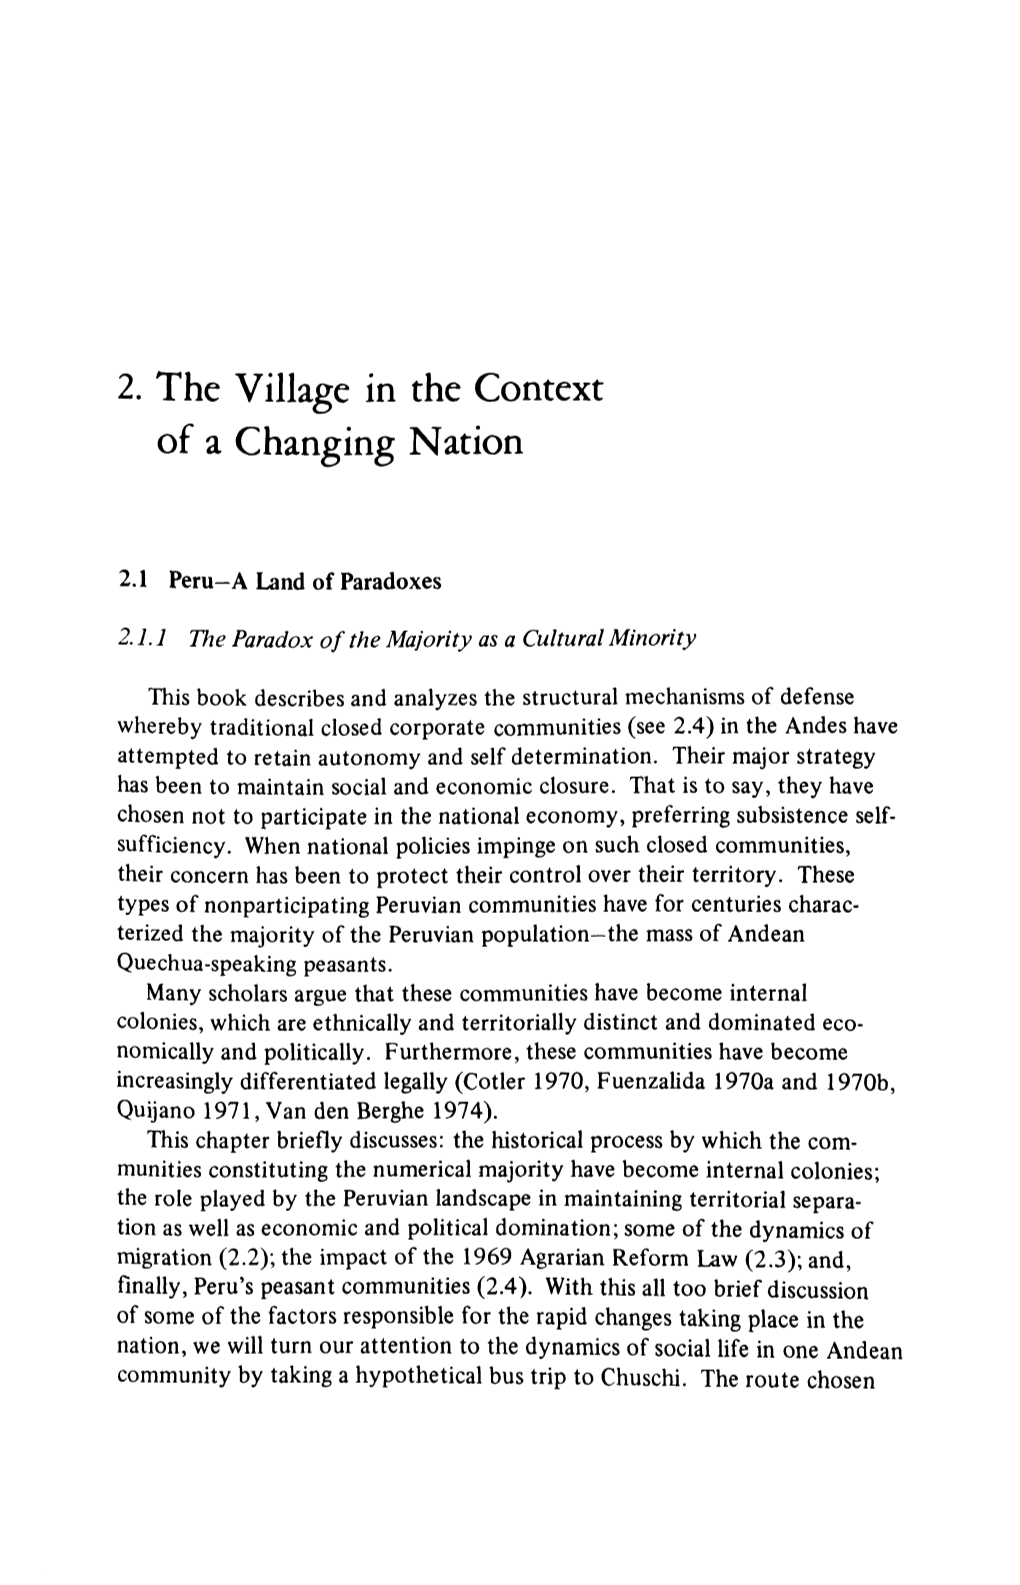 2. the Village in the Context of a Changing Nation